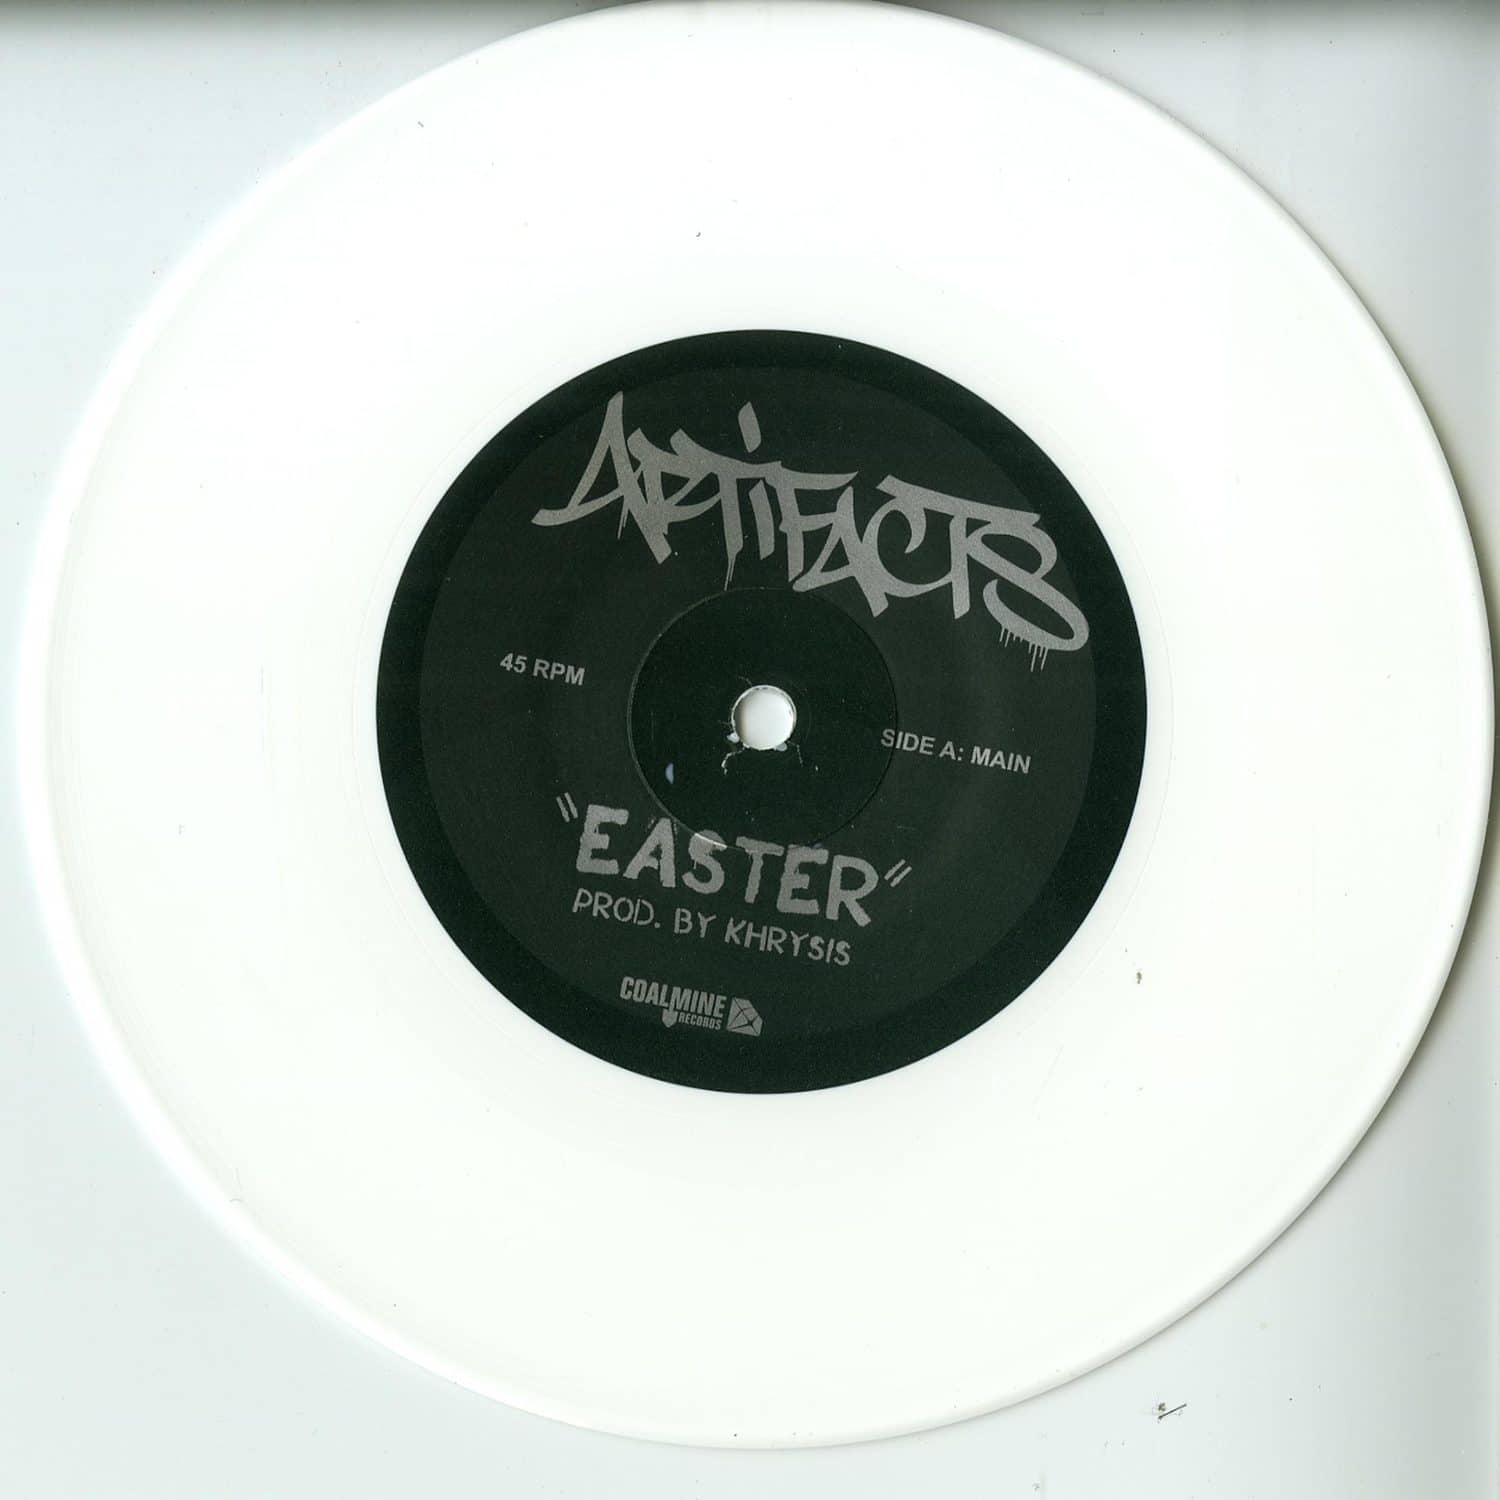 Artifacts - EASTER 